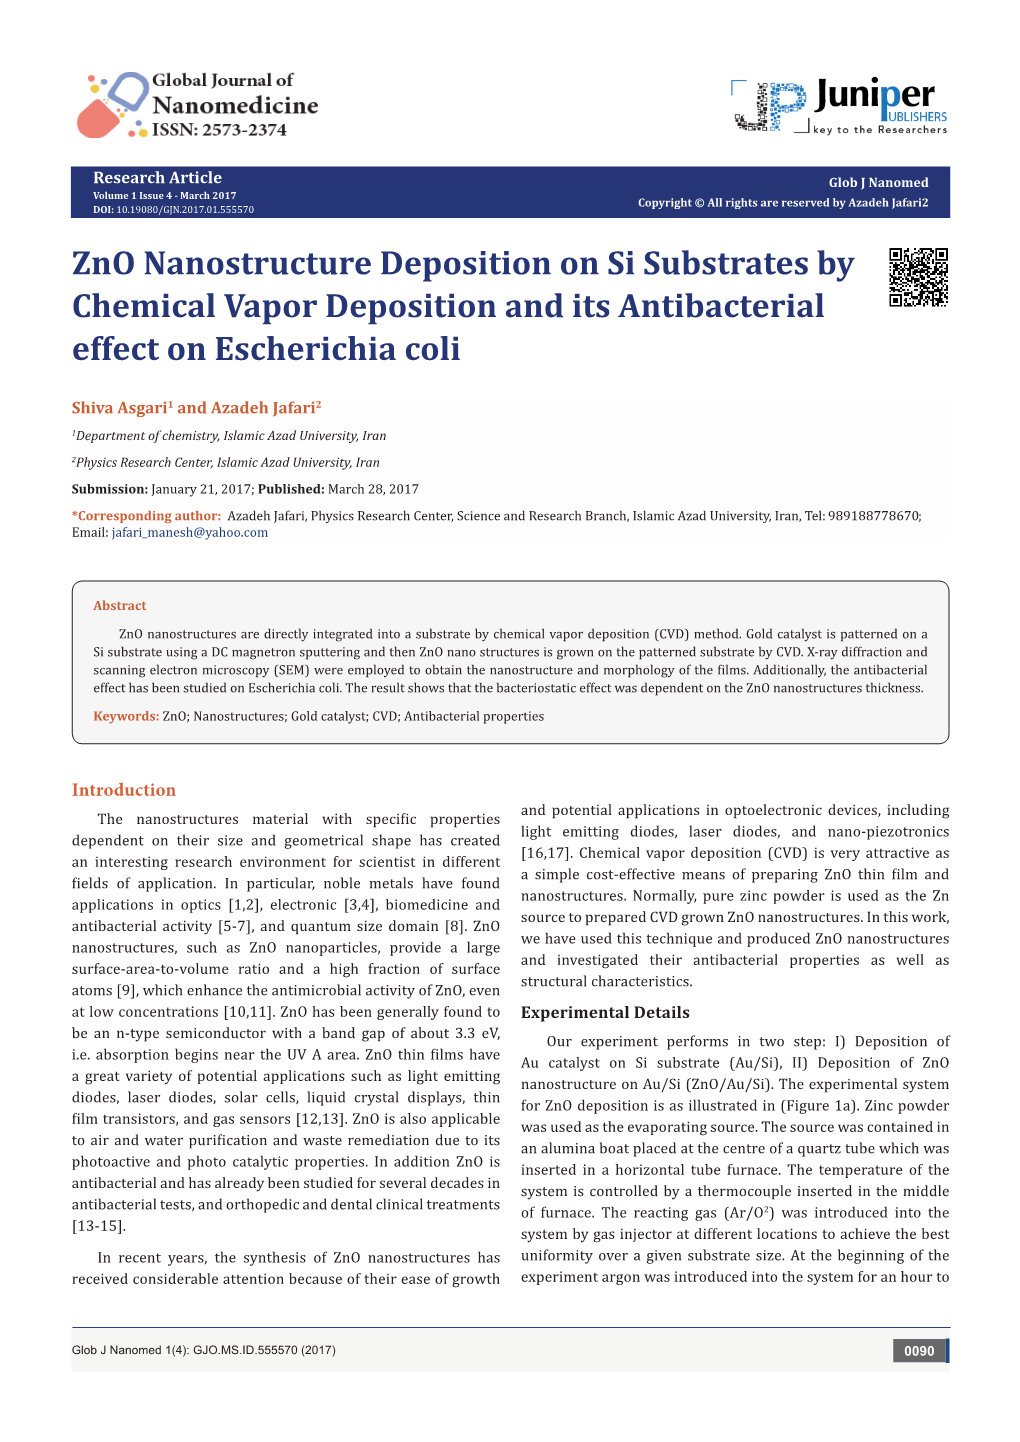 Zno Nanostructure Deposition on Si Substrates by Chemical Vapor Deposition and Its Antibacterial Effect on Escherichia Coli